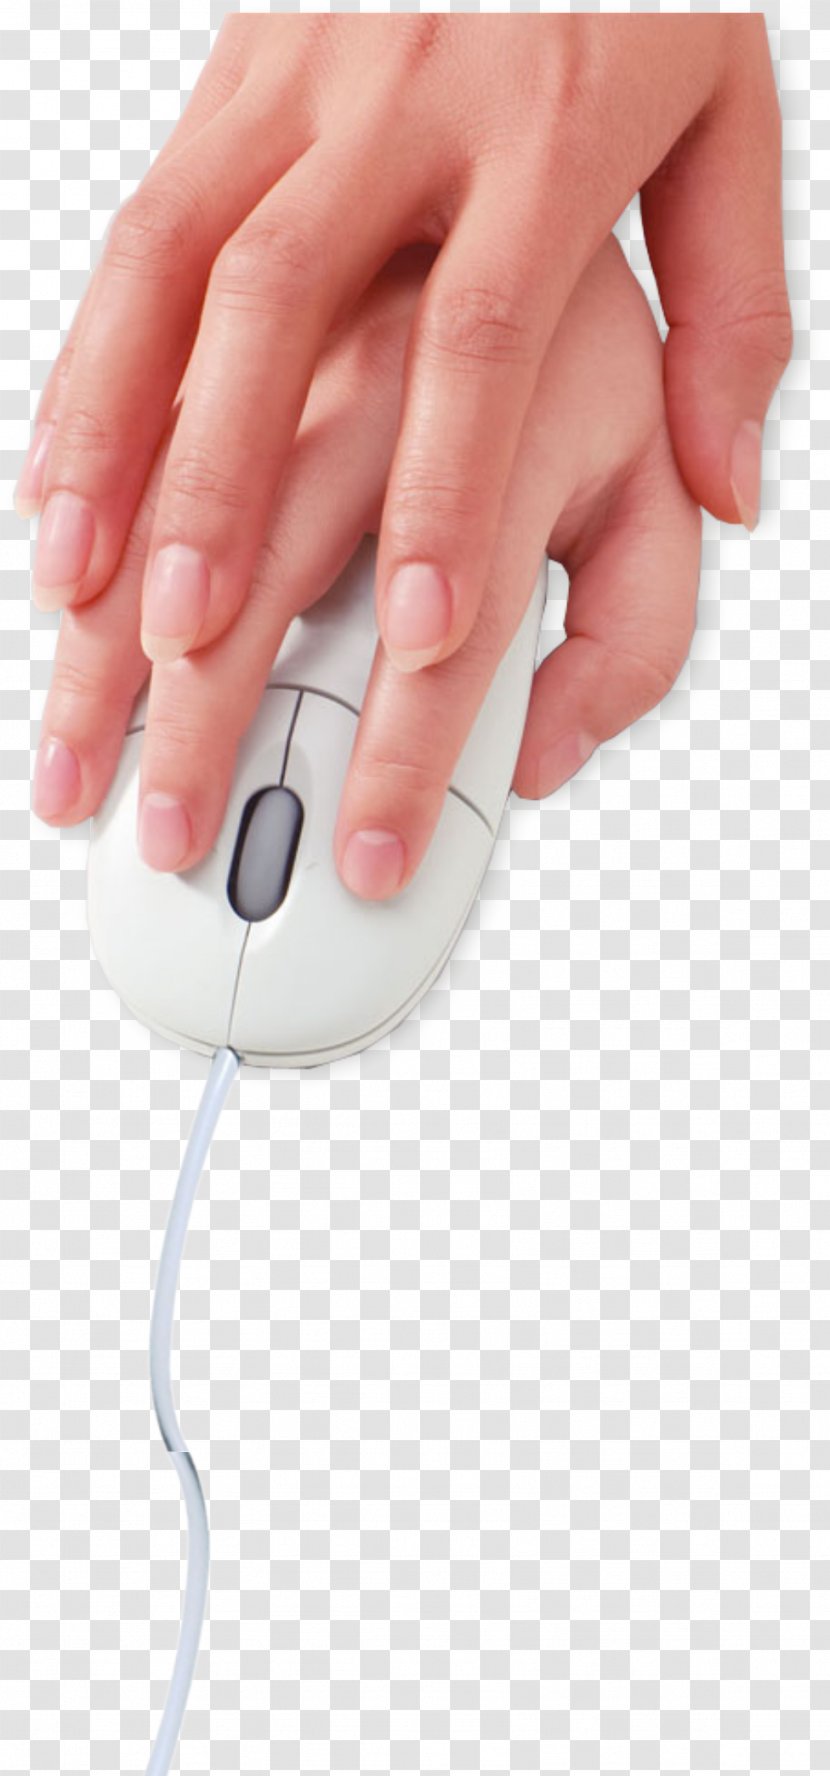 Nail Electronics Chinglish - Finger - Holding The Mouse Transparent PNG